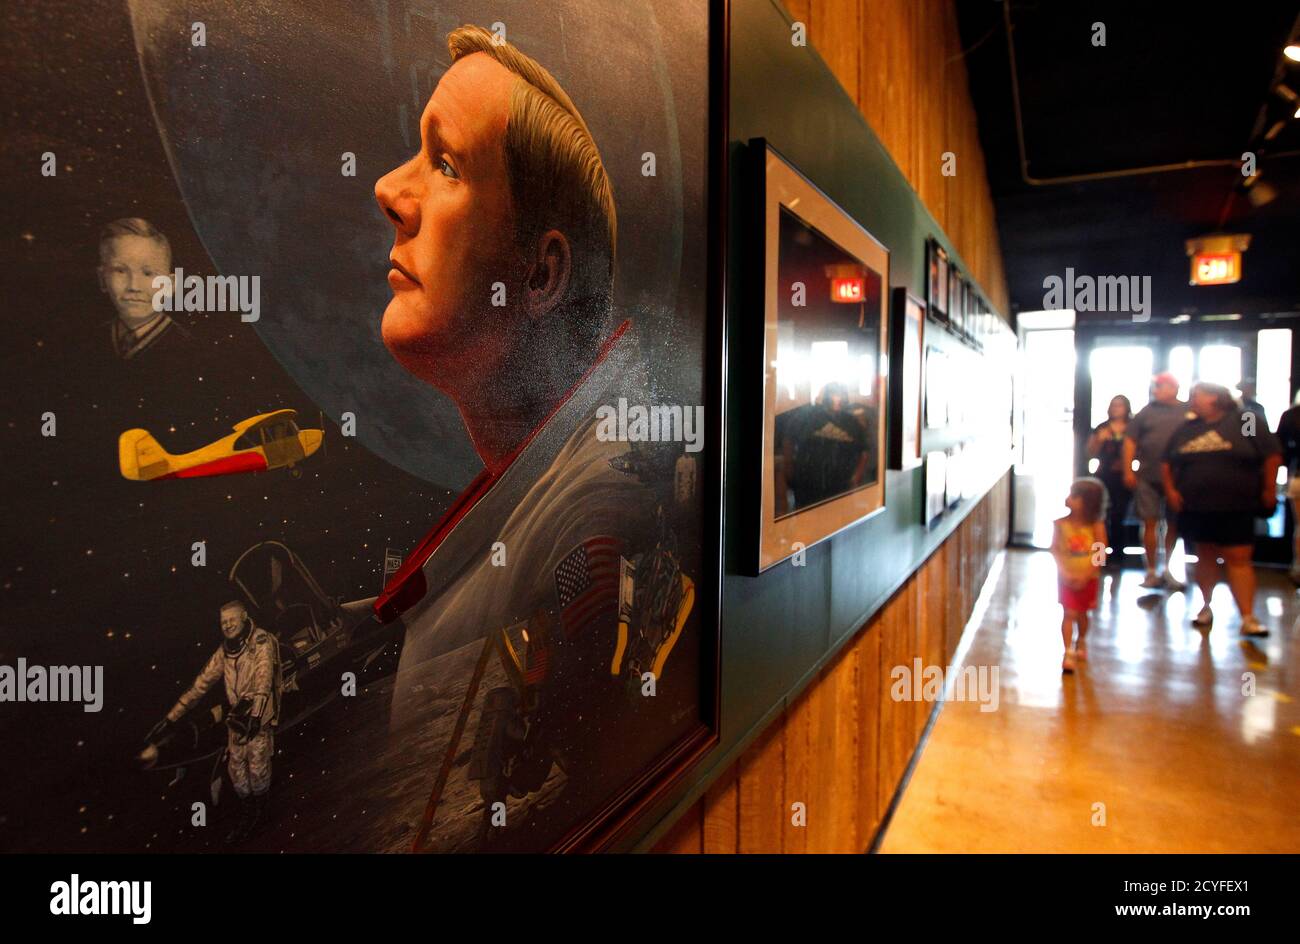 Visitors walk by a portrait of Neil Armstrong before a public memorial service for Armstrong at the Armstrong Air and Space Museum in Wapakoneta, Ohio August 29, 2012. Armstrong, who took a giant leap for mankind when he became the first person to walk on the moon, has died at the age of 82, his family said on Saturday.  REUTERS/Matt Sullivan  (UNITED STATES - Tags: SCIENCE TECHNOLOGY OBITUARY PROFILE) Stock Photo